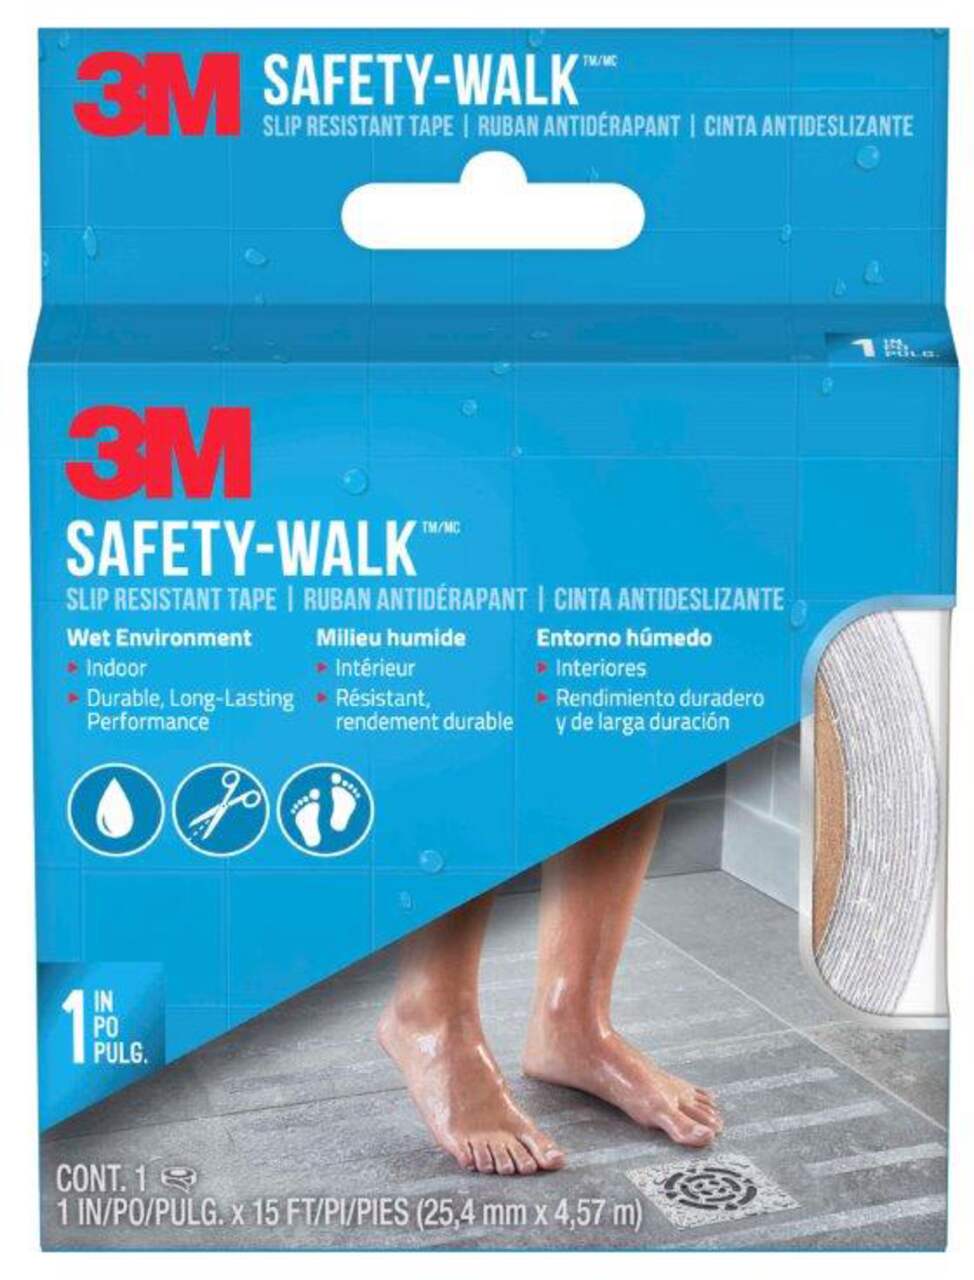 https://media-www.canadiantire.ca/product/fixing/hardware/general-hardware/0460898/slip-resist-tape-1-x15-clear-86871b7b-424e-4939-a3e3-77ad43c648c4.png?imdensity=1&imwidth=640&impolicy=mZoom